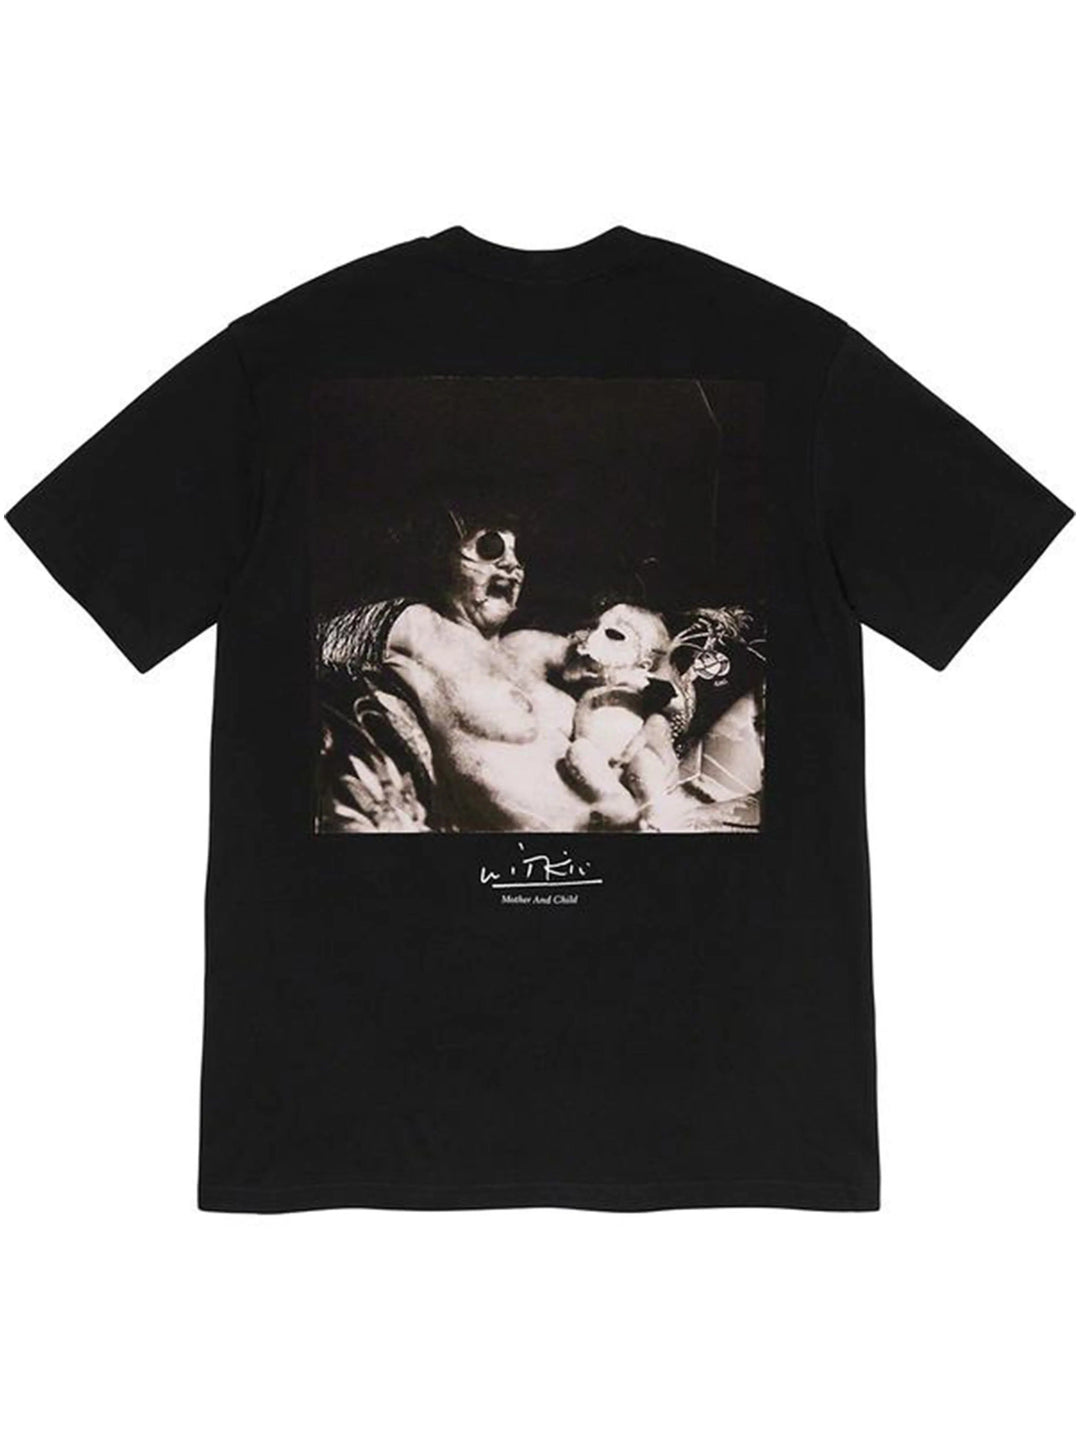 Supreme Joel-Peter Witkin Mother and Child Tee Black [FW20] Supreme